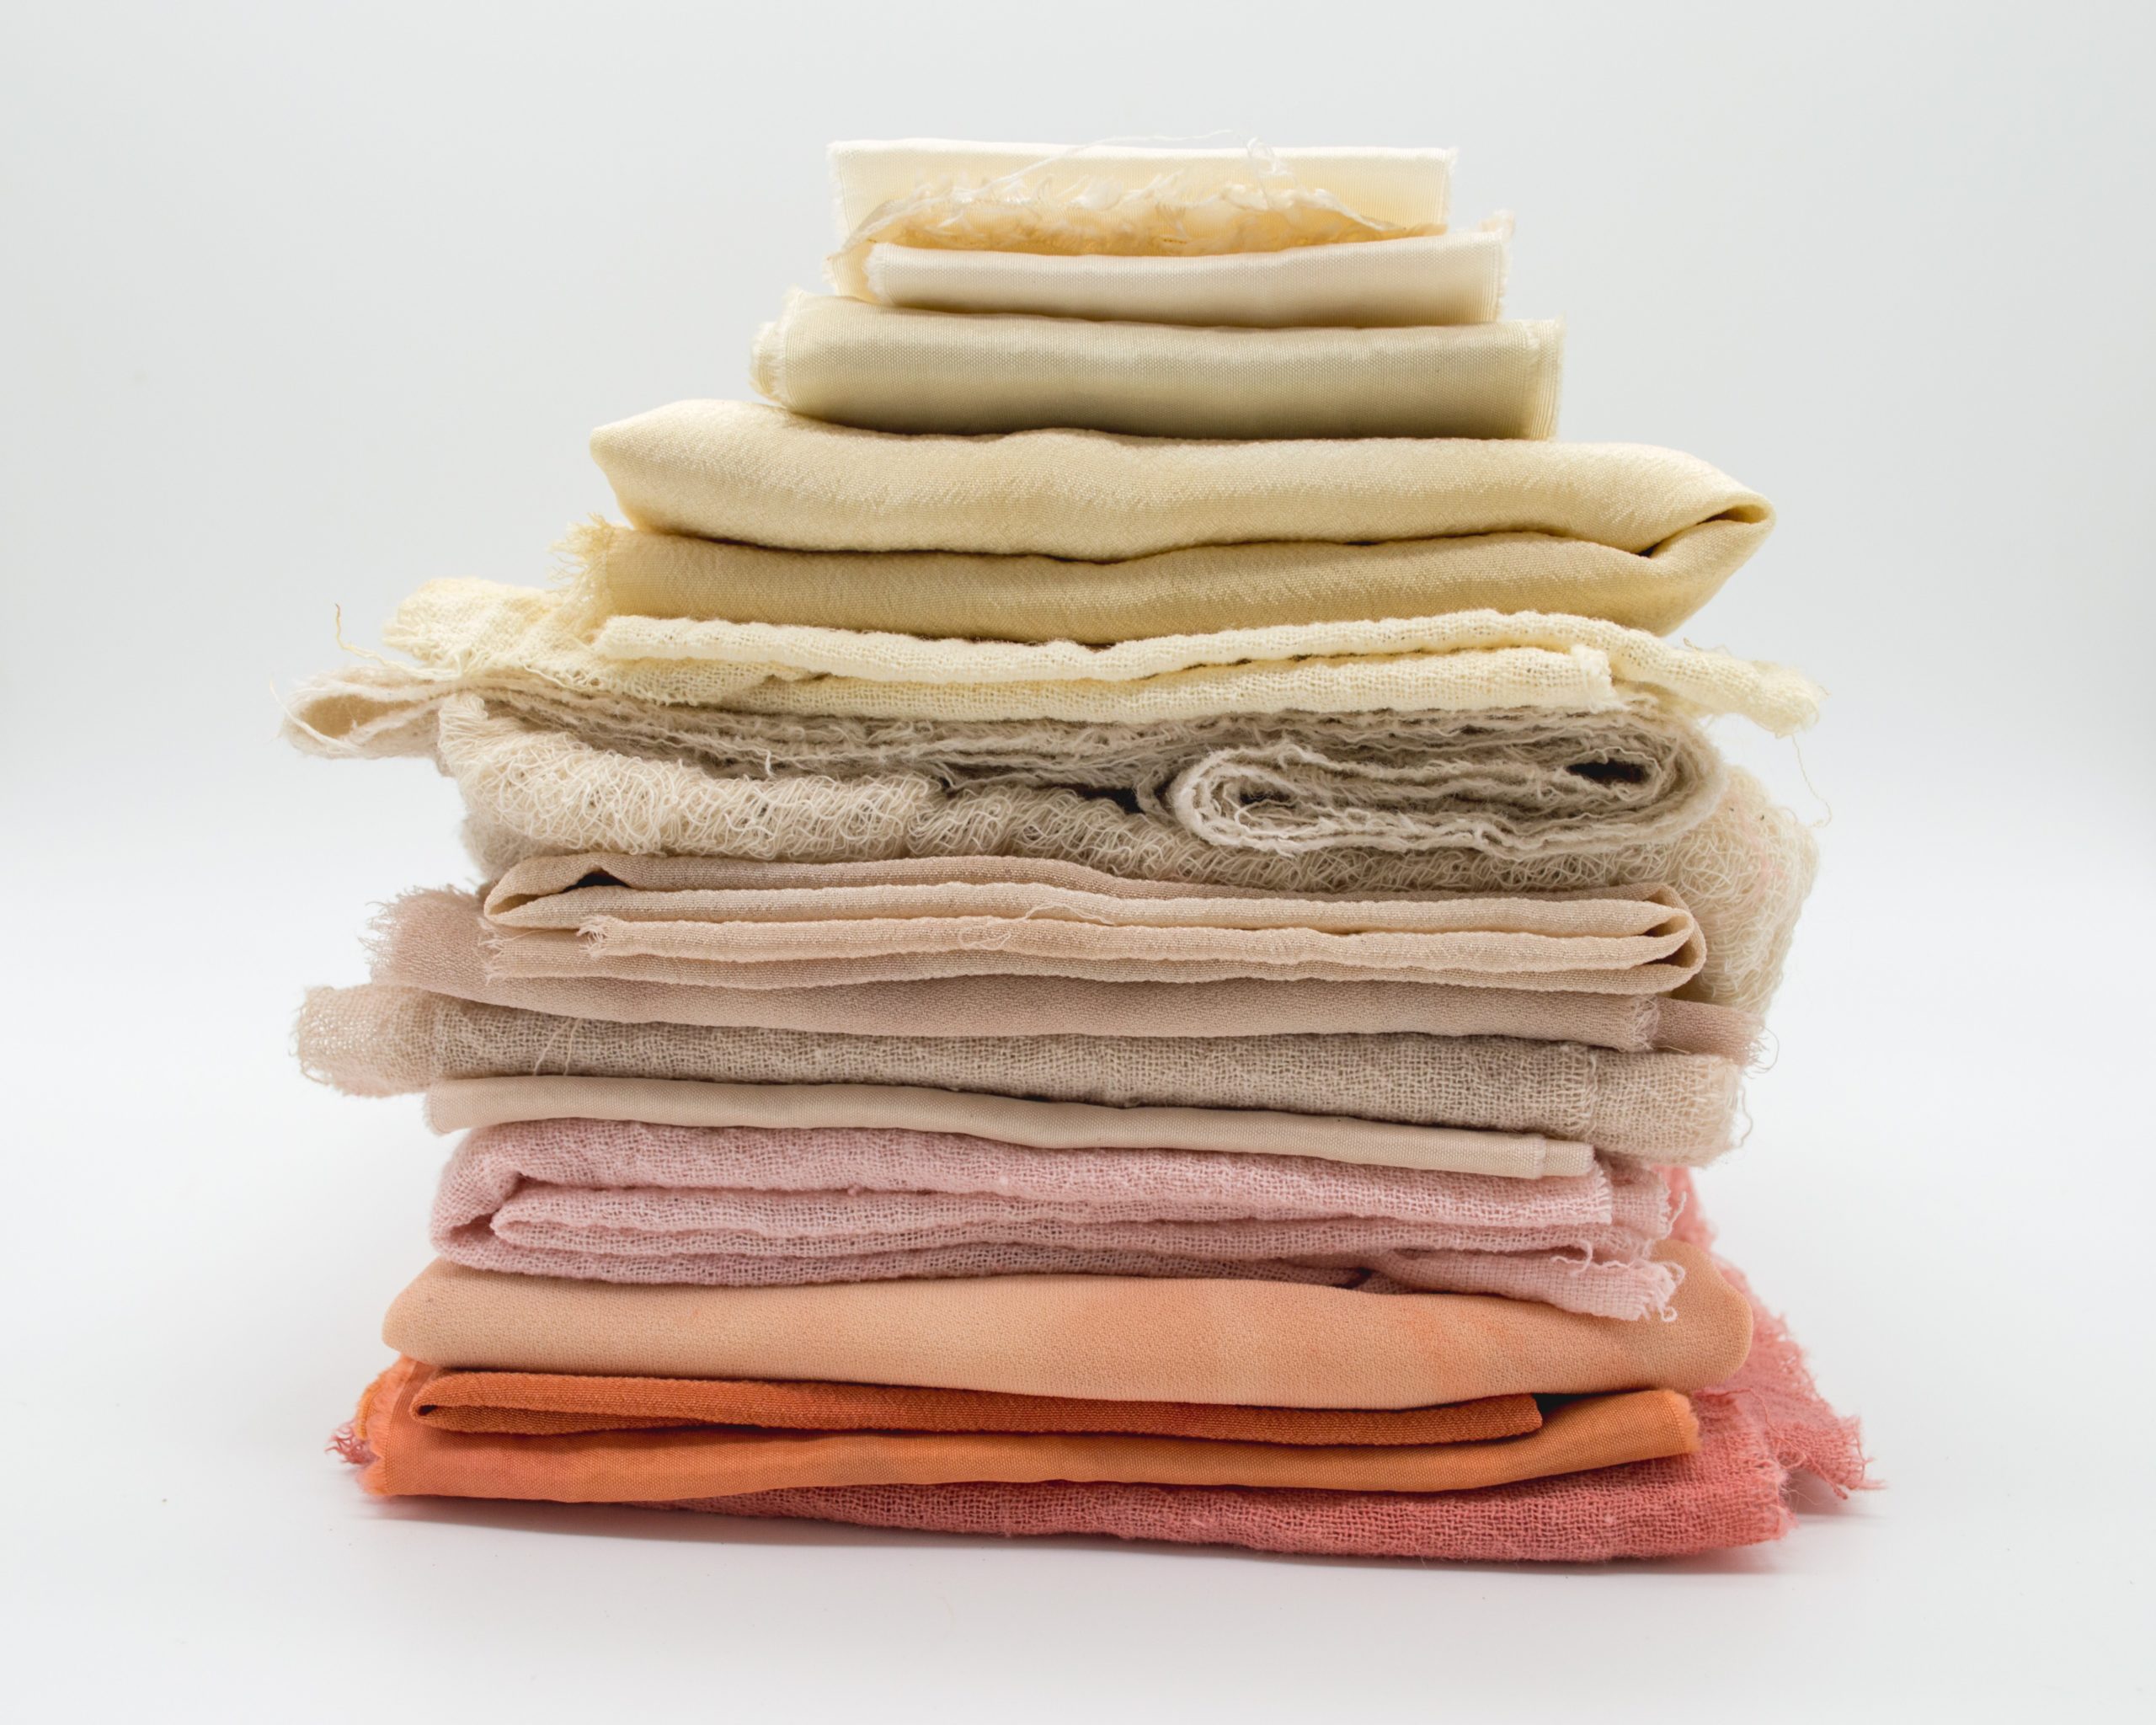 A photo of different coloured fabric scraps folded and piled up in a colour gradient